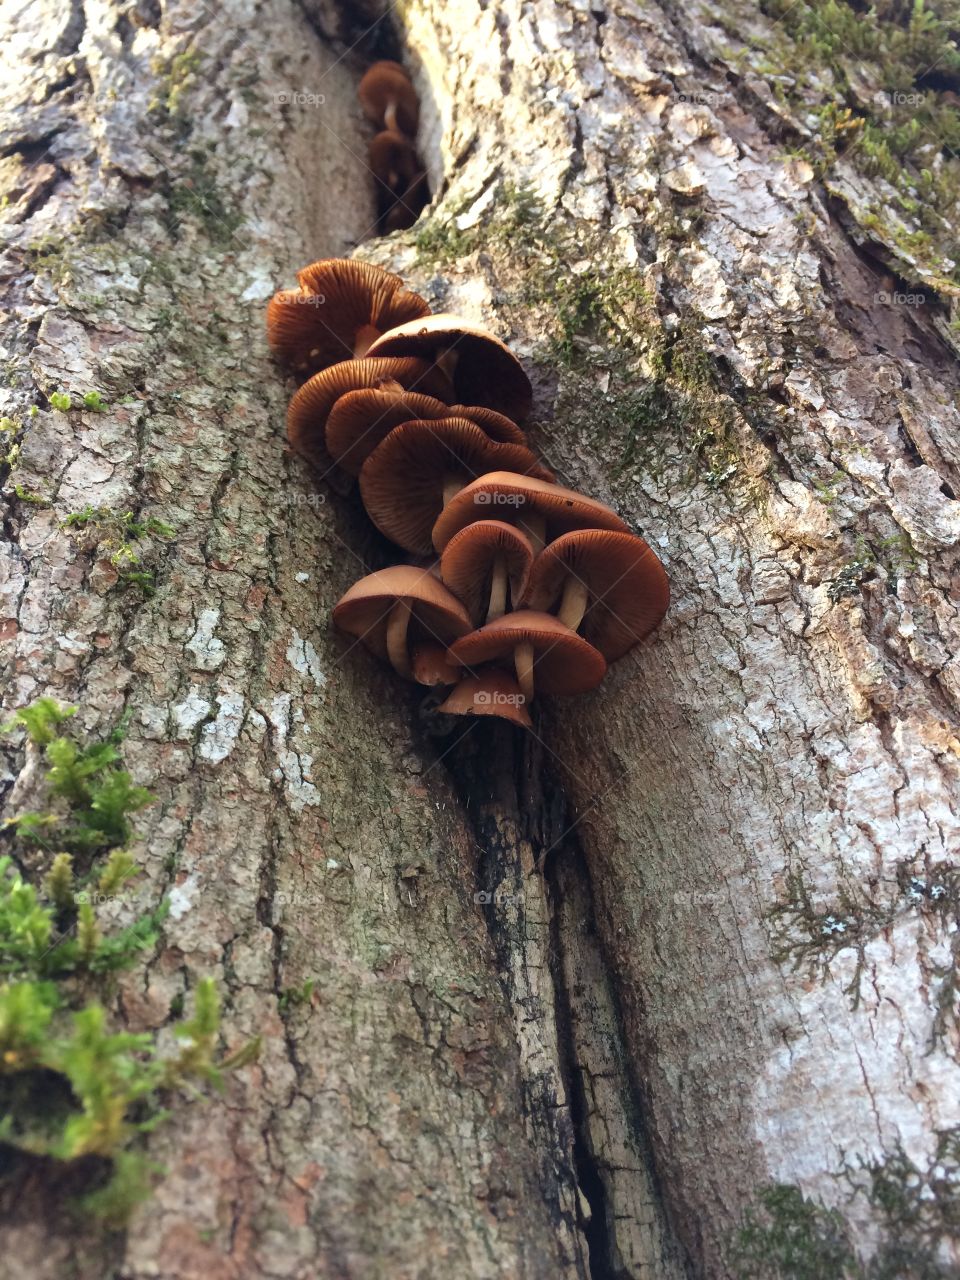 Mushroom cluster in the crack of a tree